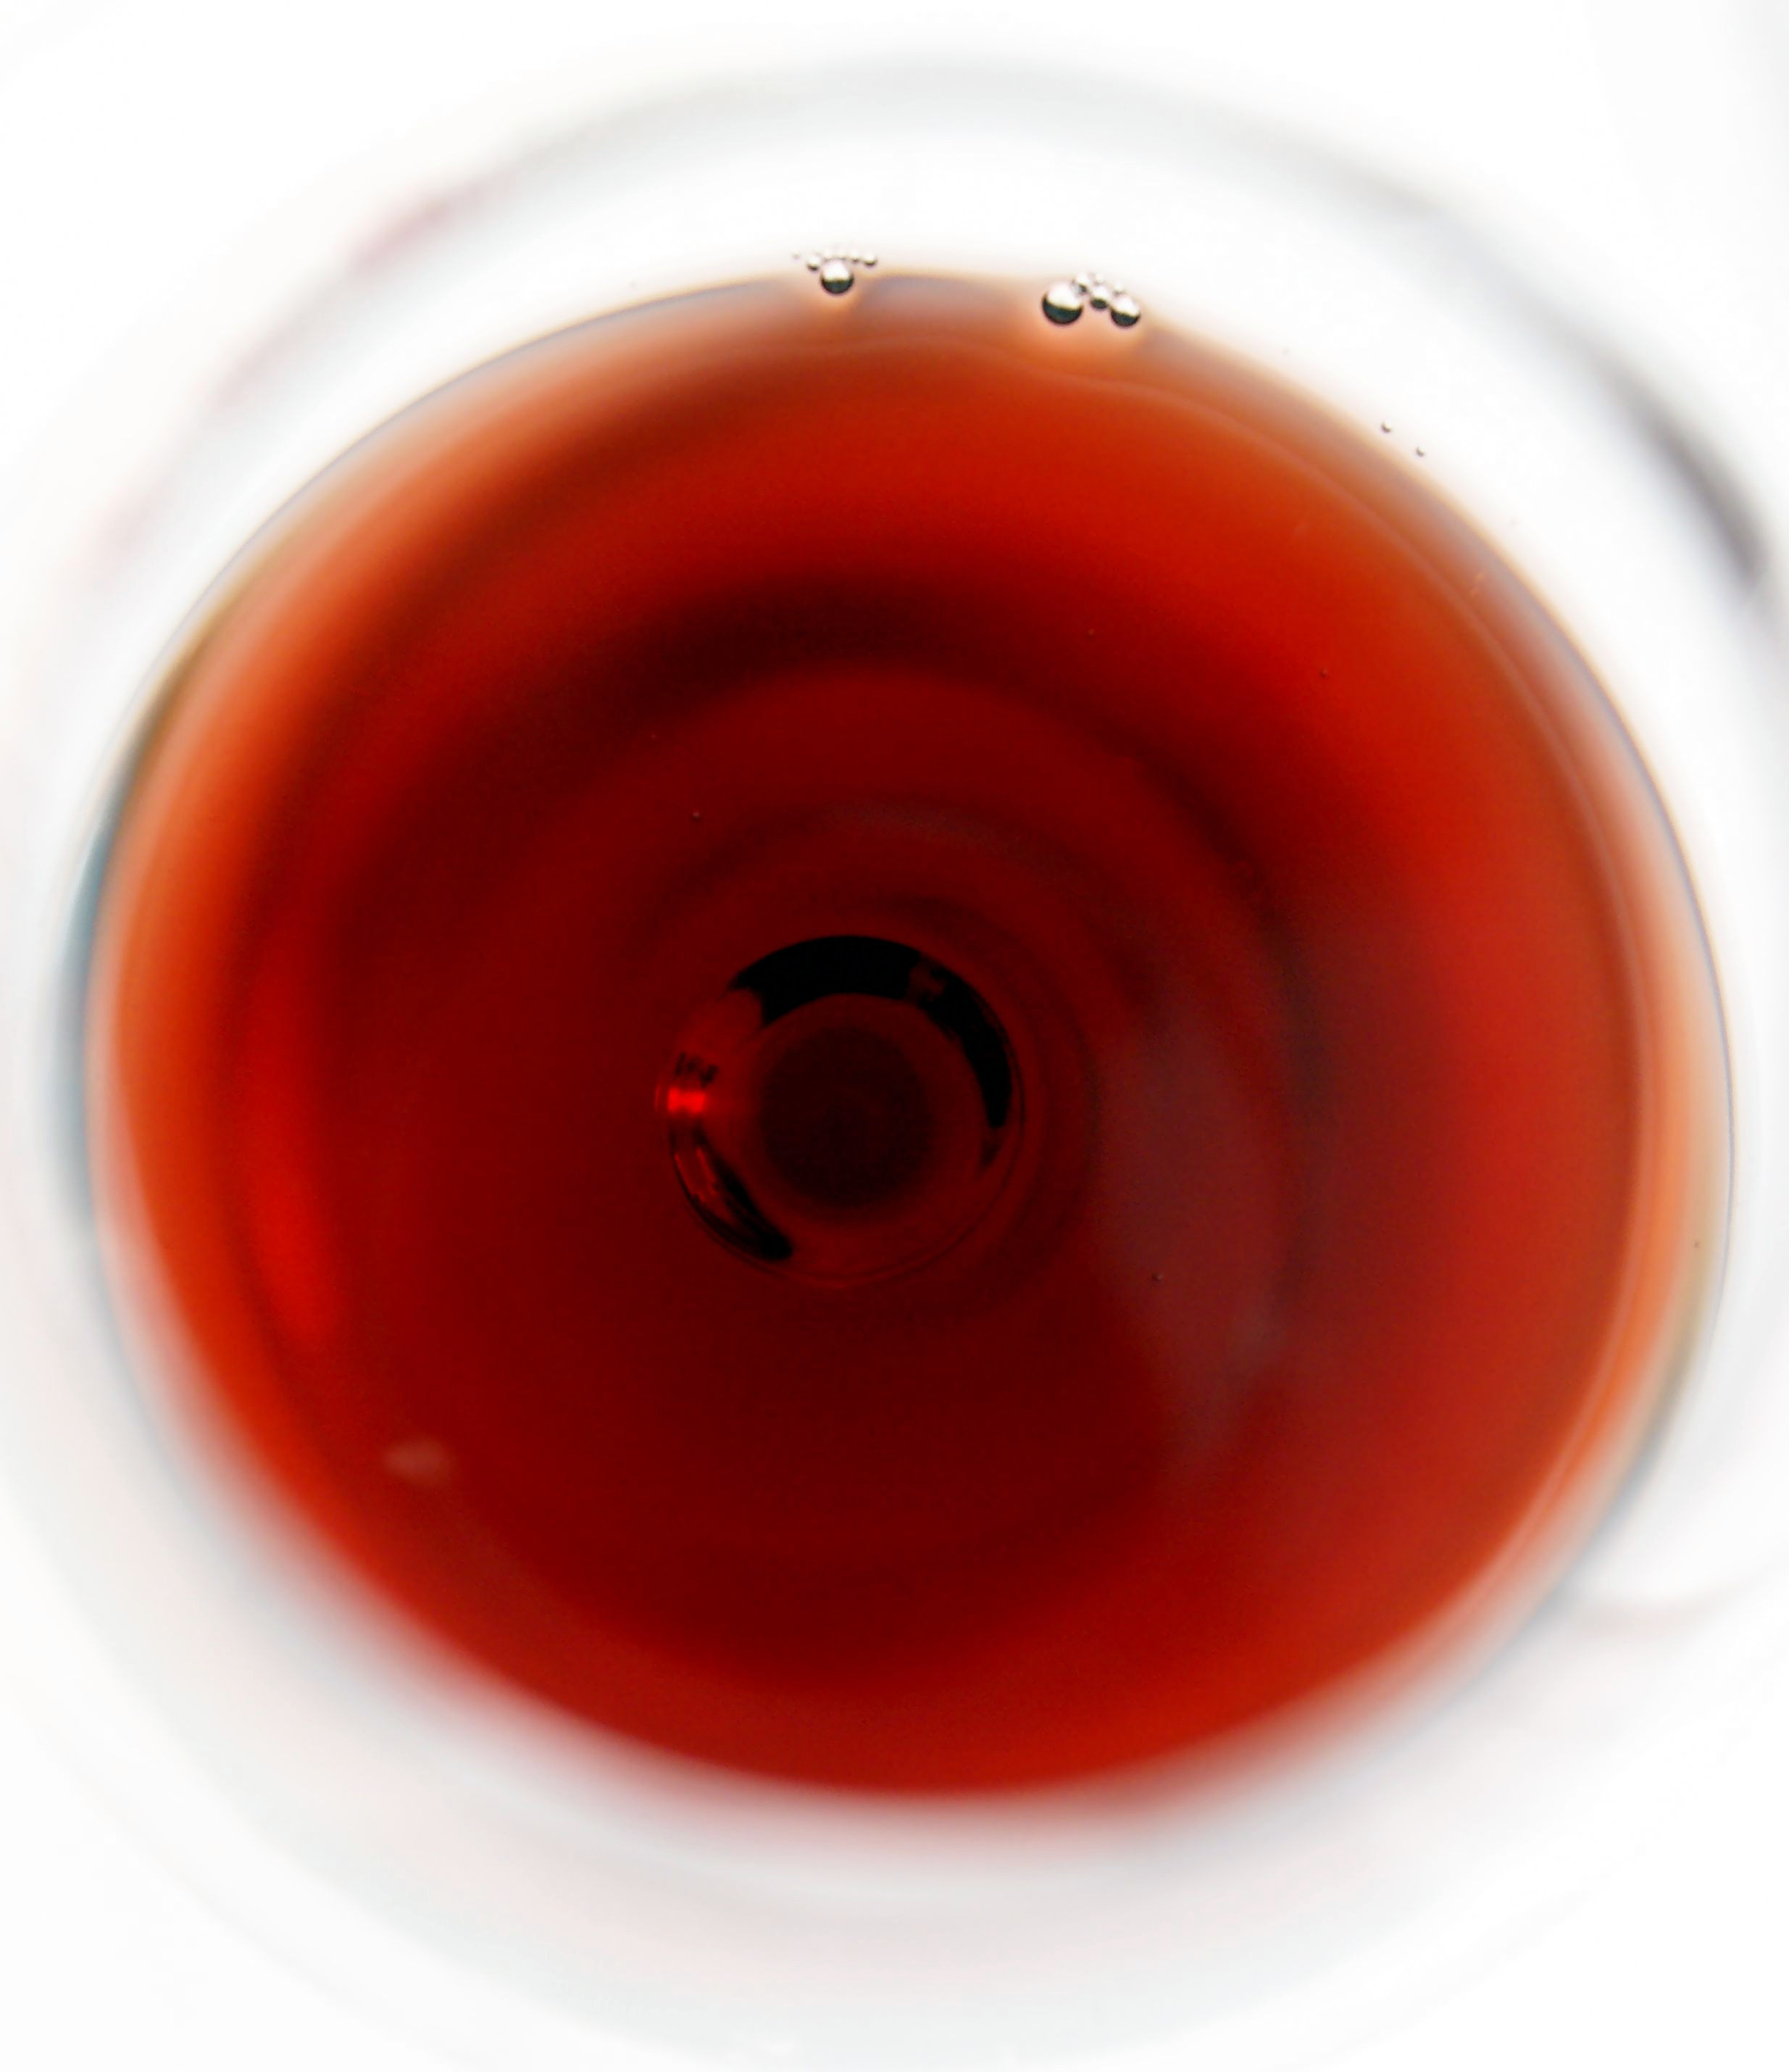 The incredible colour of Malvirà Roero 2009 at four years of age.